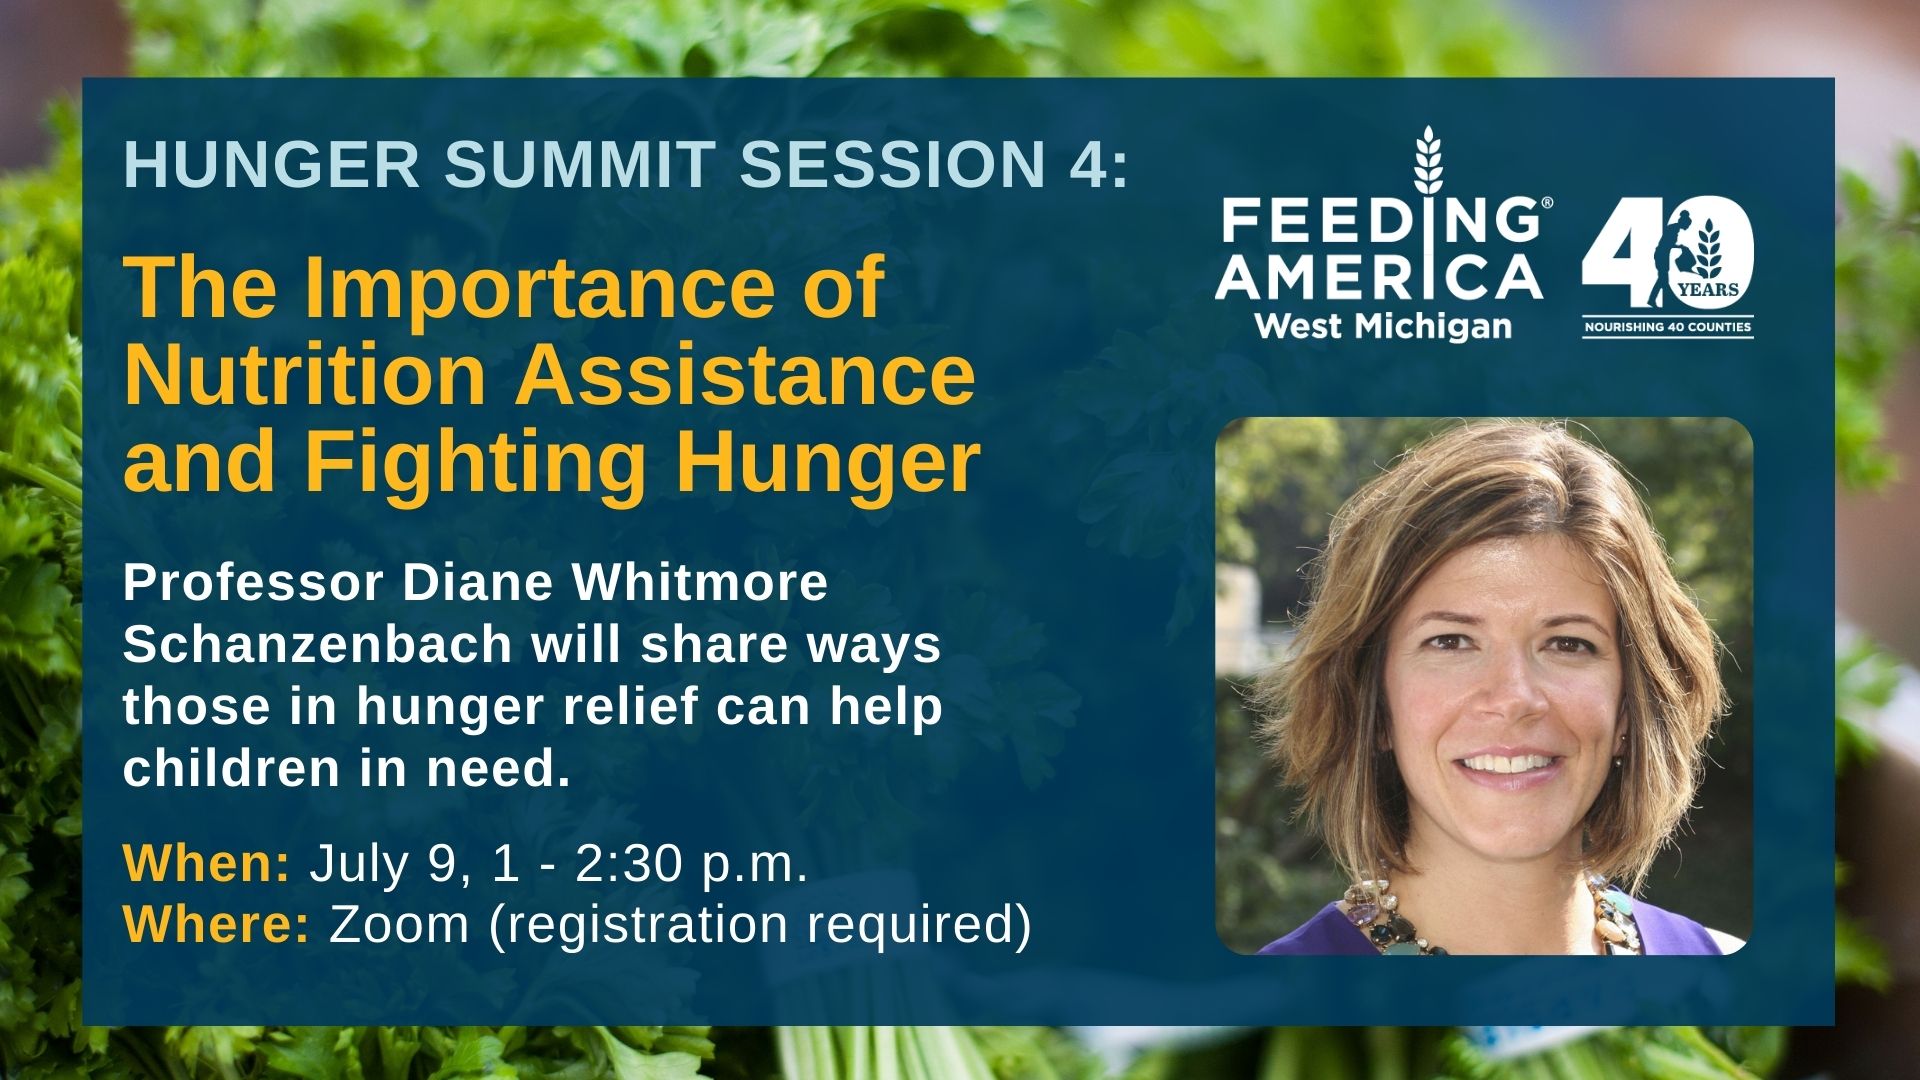 Hunger Summit Session 4 - The Importance of Nutrition Assistance and Fighting Hunger - Professor Diane Whitmore Schanzenbach will share ways those in hunger relief can help children in need - July 9, 1-2:30 PM on Zoom (registration required)